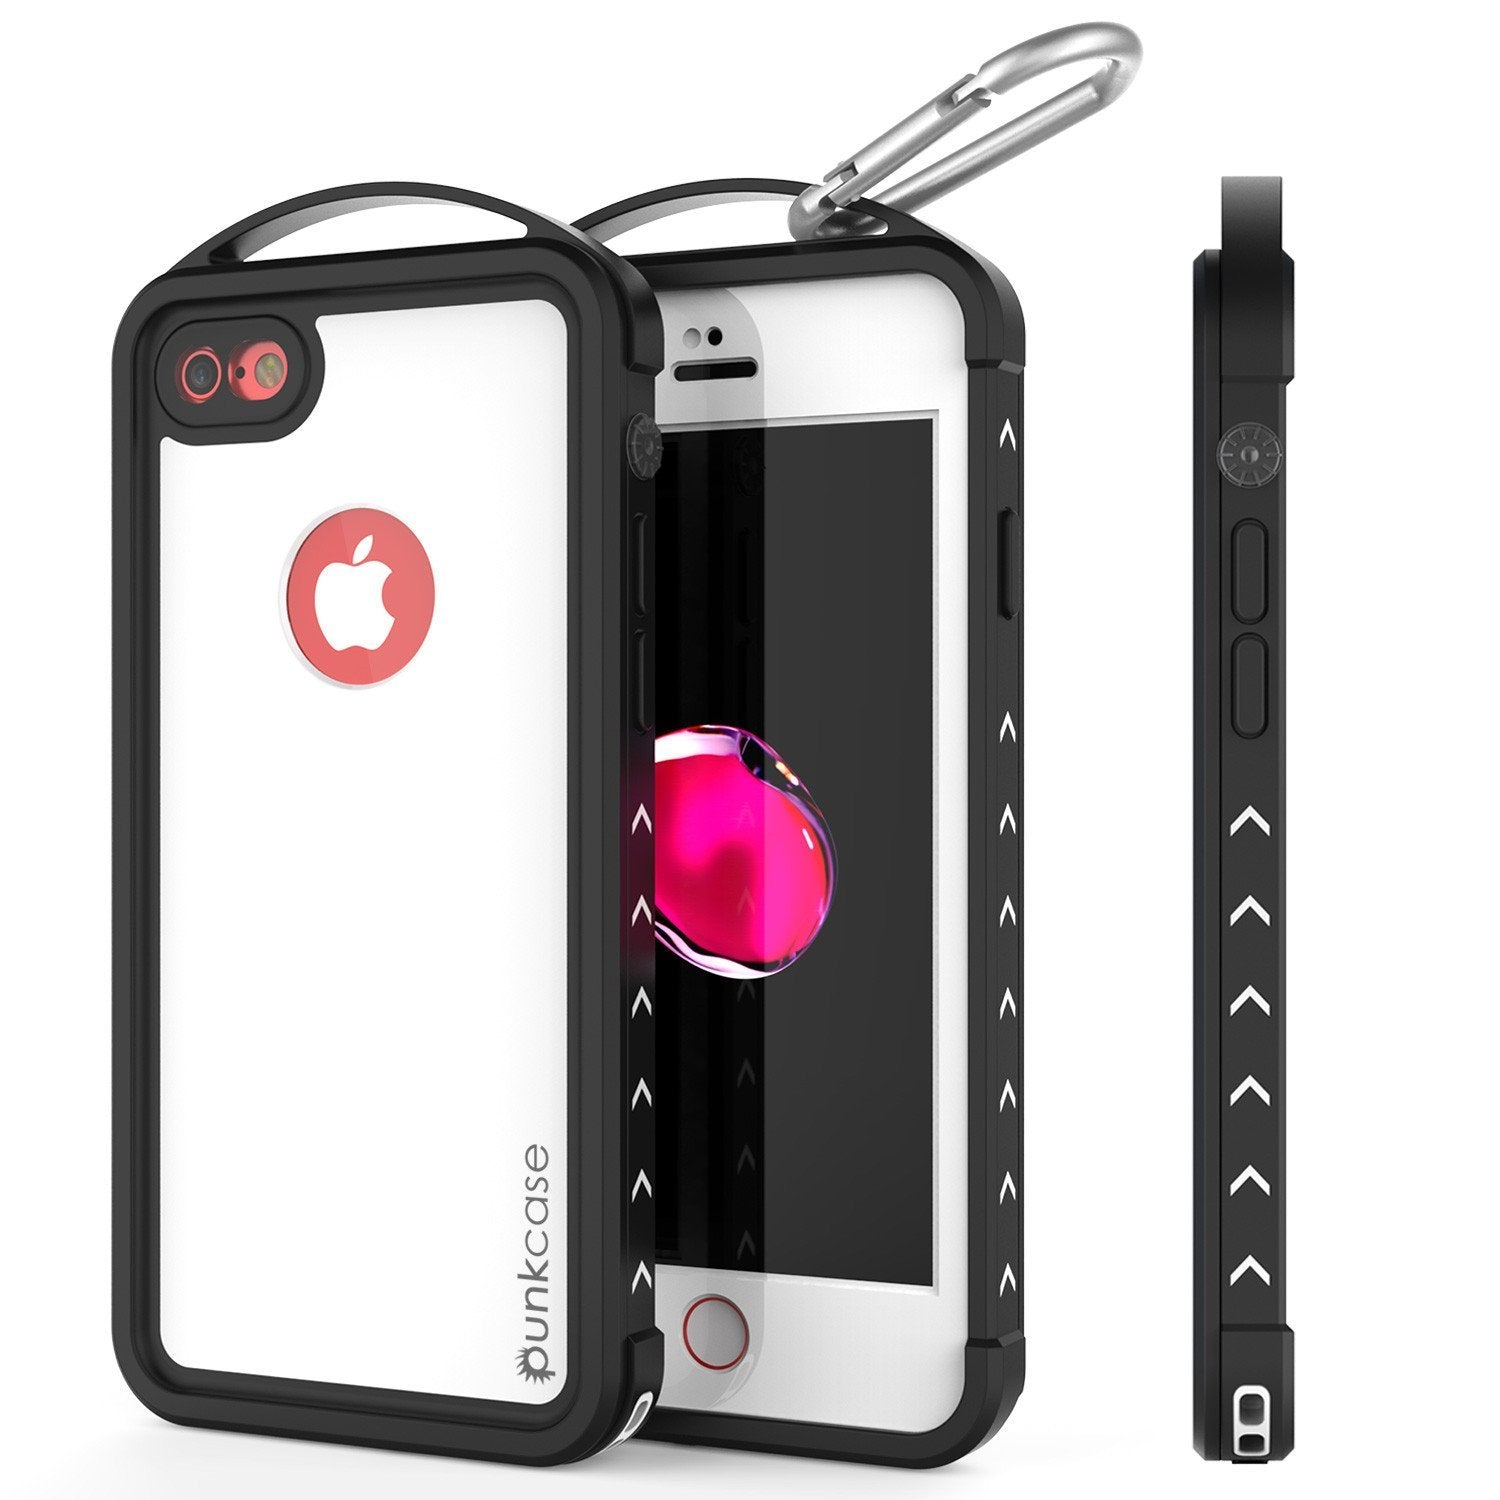 iPhone 8 Waterproof Case, Punkcase ALPINE Series, CLEAR | Heavy Duty Armor Cover (Color in image: clear)